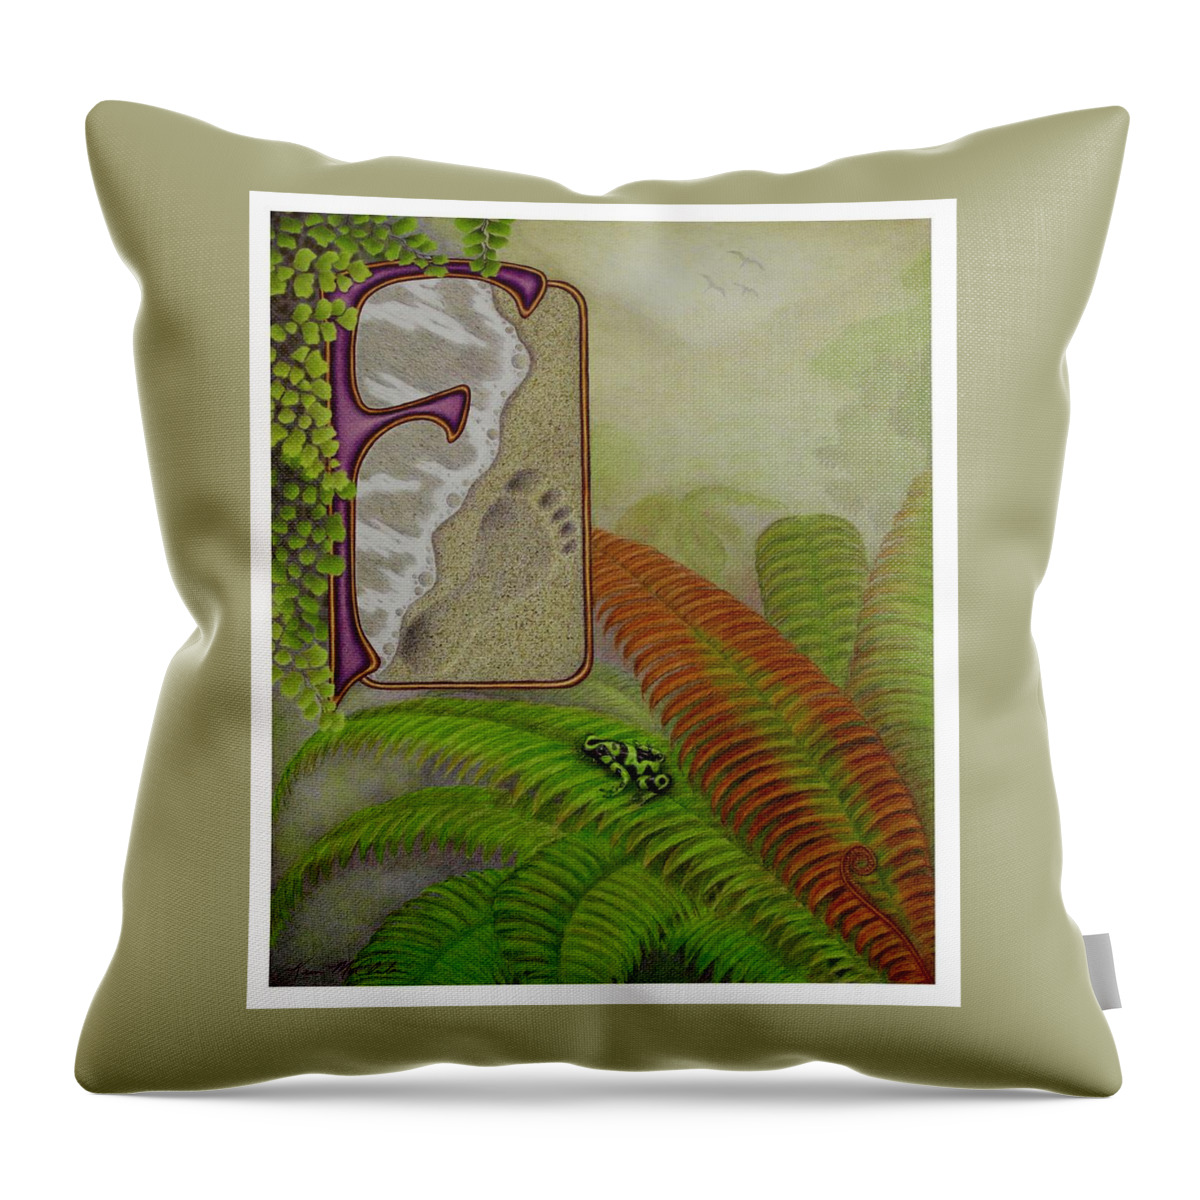 Kim Mcclinton Throw Pillow featuring the drawing F is for Fern by Kim McClinton